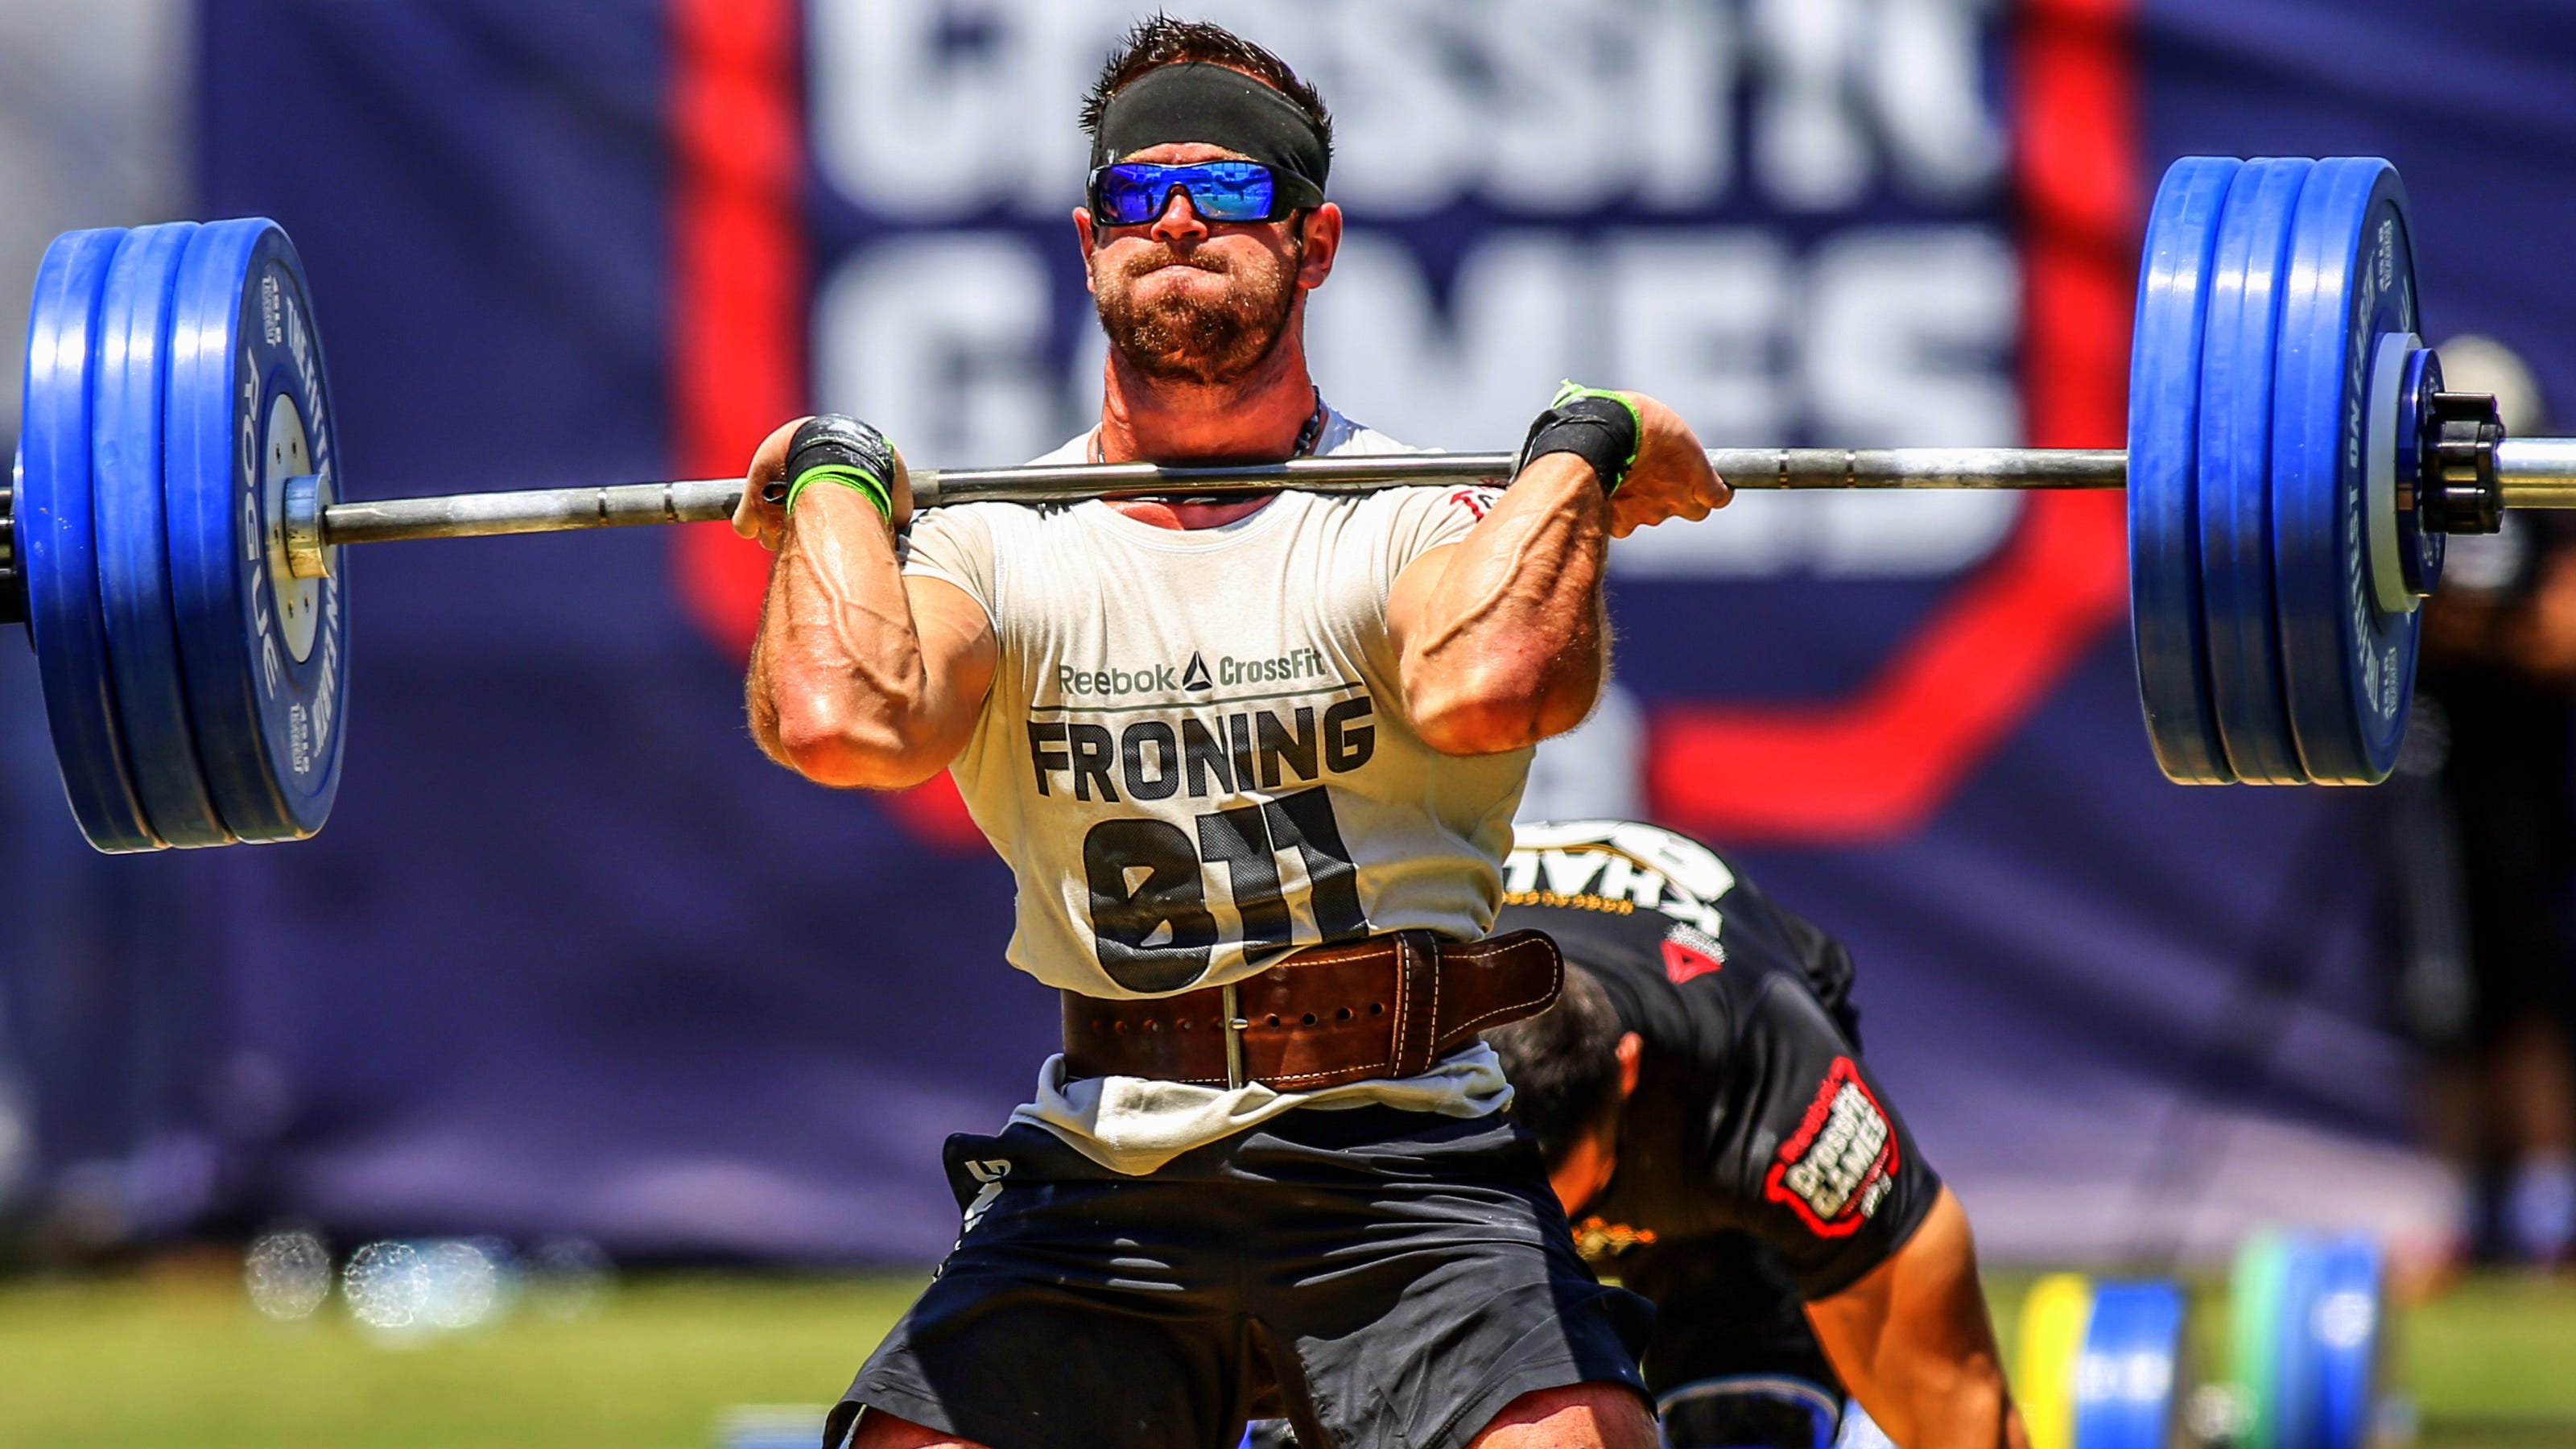 CrossFit Games 2019: Rich Froning prepared for Mat Fraser to ascend